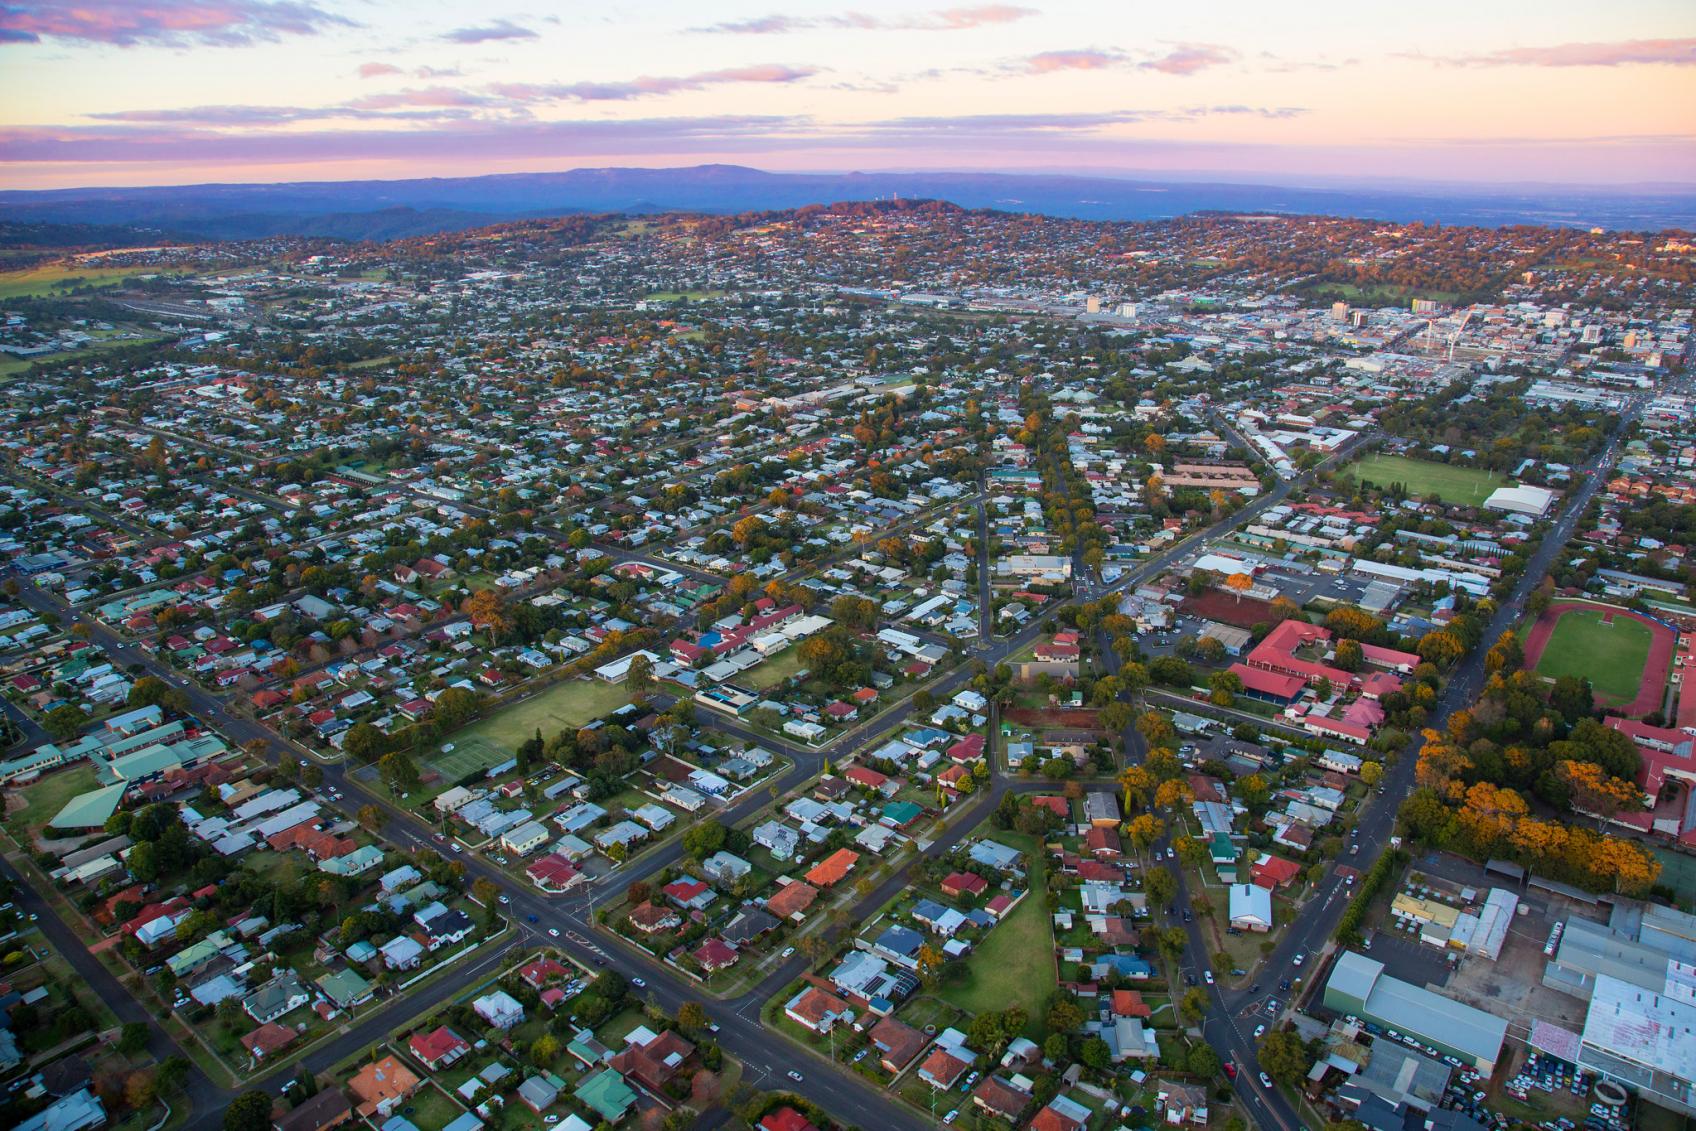 An aerial image of Toowoomba on the Darling Downs South West Queensland with a soft pink sunset